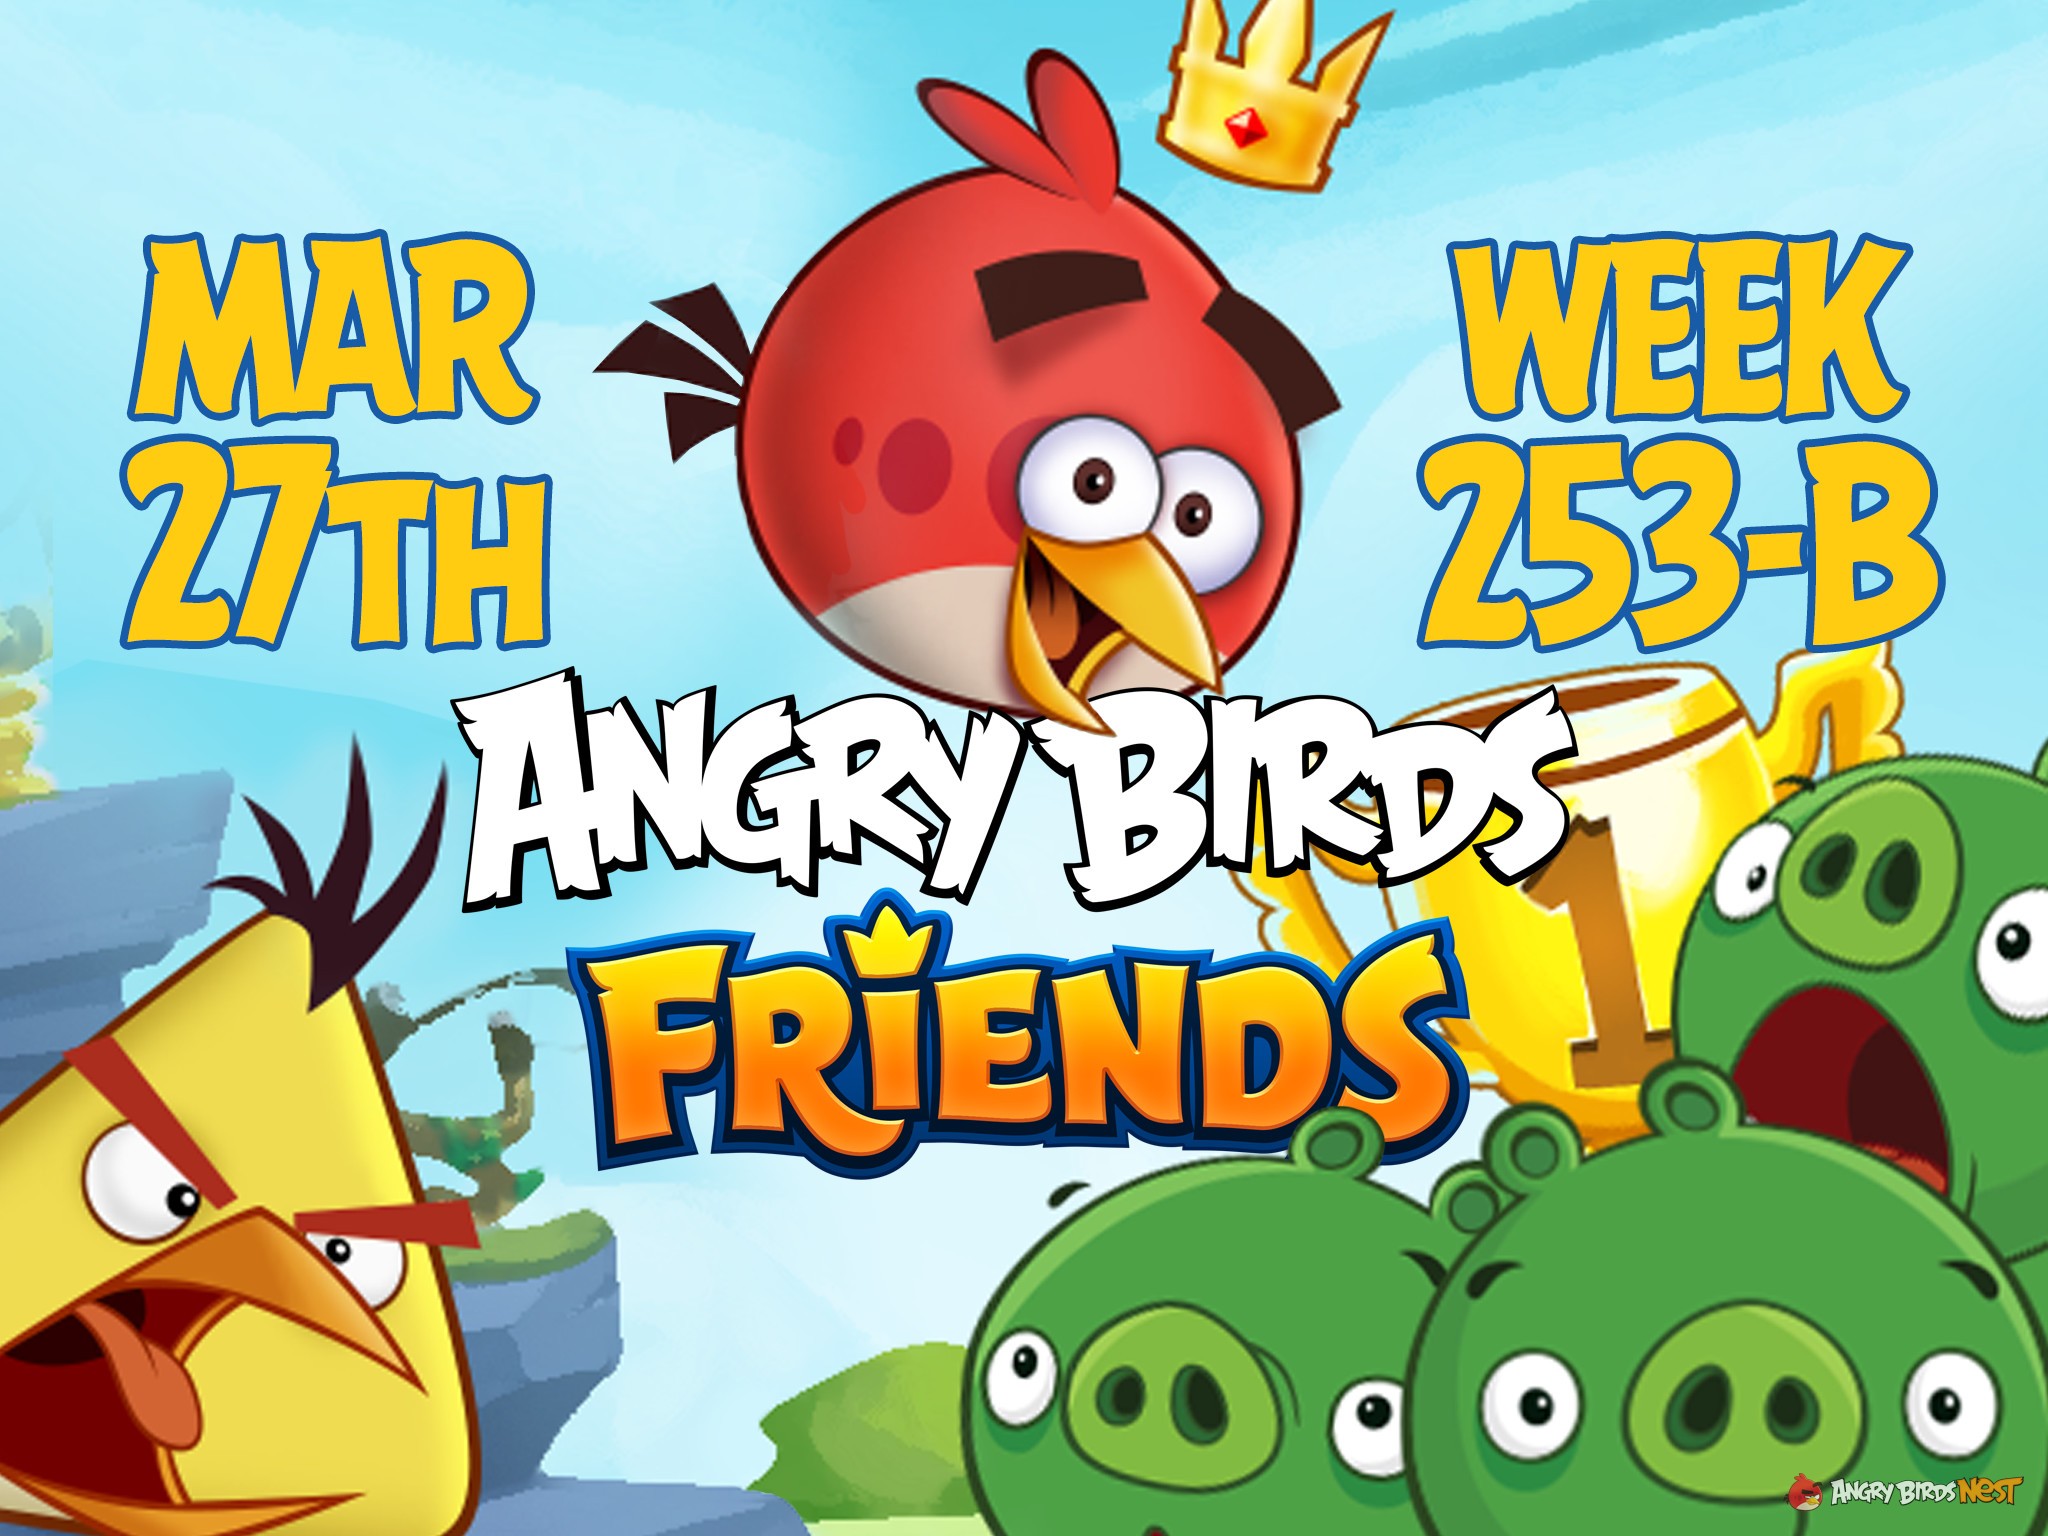 Angry Birds Friends Tournament Week 253-B Feature Image